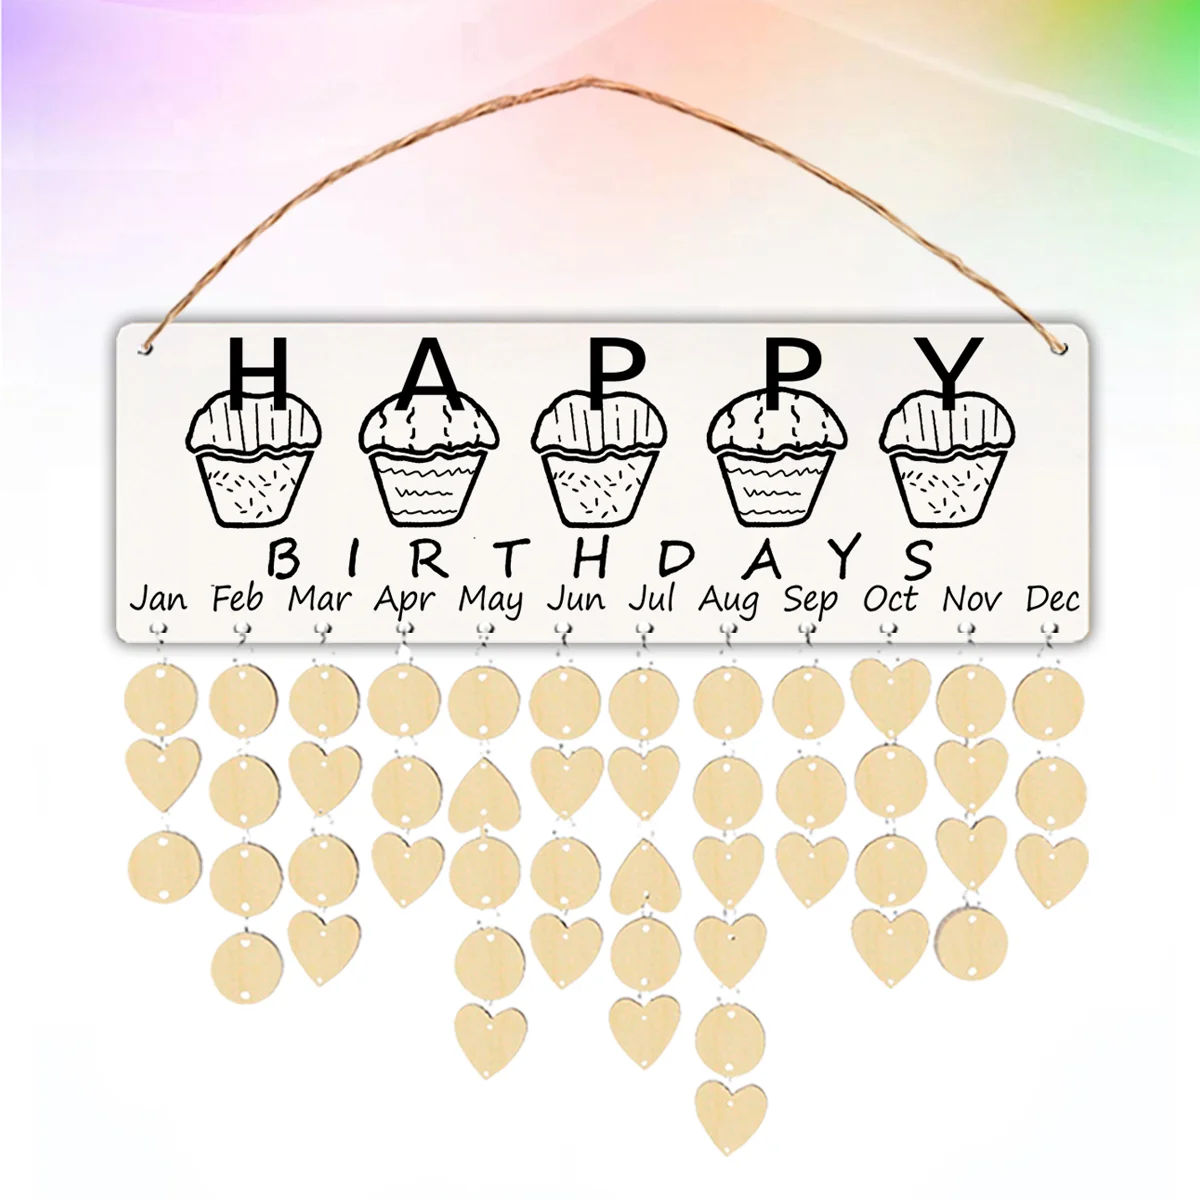 Wooden Birthday Reminder Board DIY Dates Reminder Sign Rope Hanging Events Anniversary Celebration Calendar Wall Plaque with supermarket plastic double sided advertising rotatable pop clip price tag label sign holder display clips with rewrite board